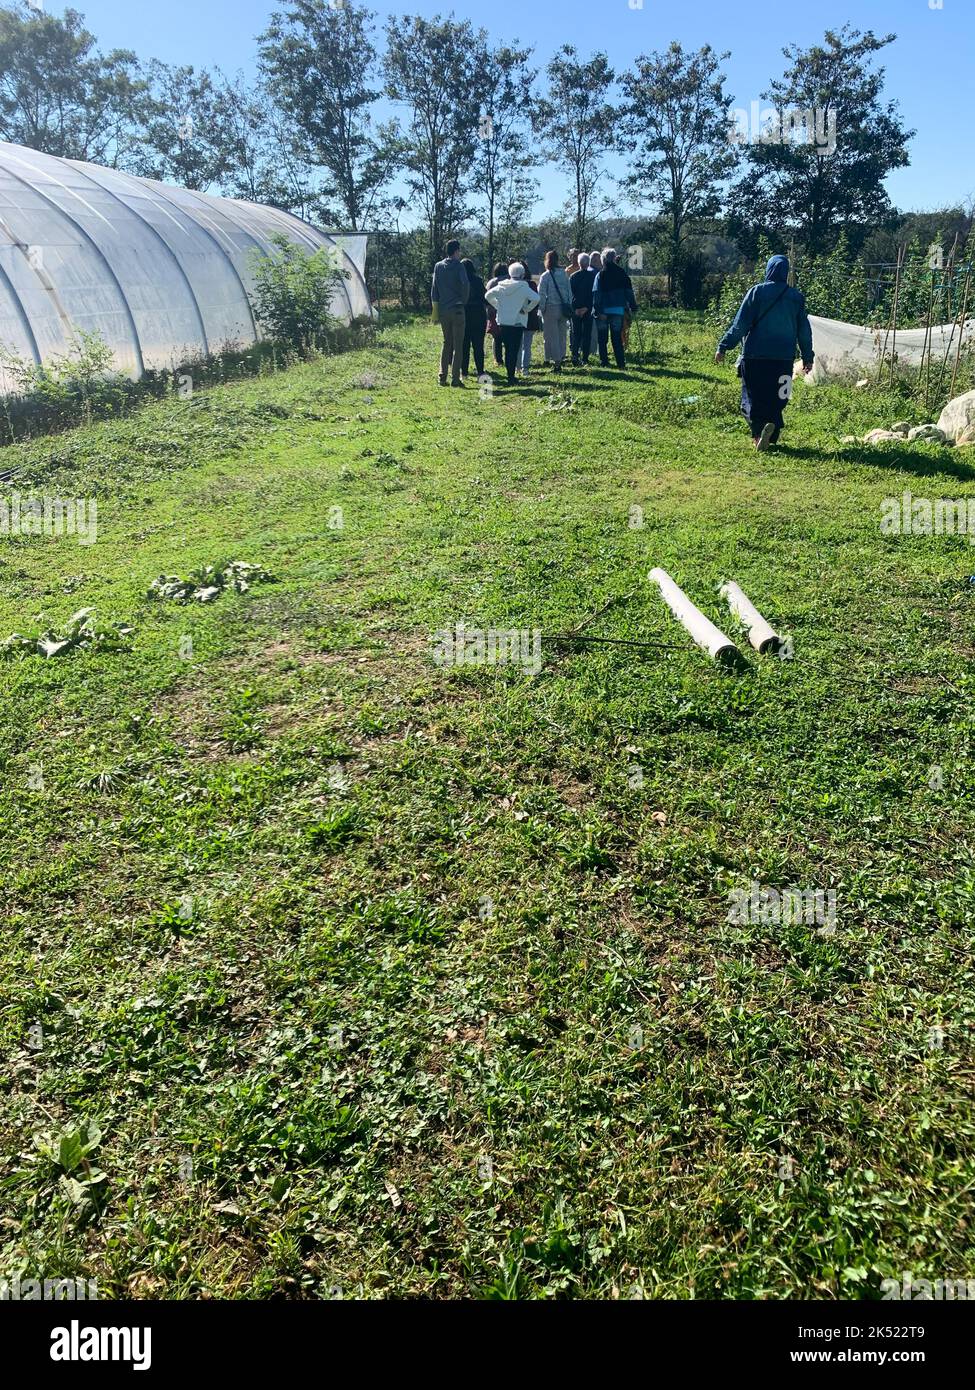 Vegetable cultivation Stock Photo